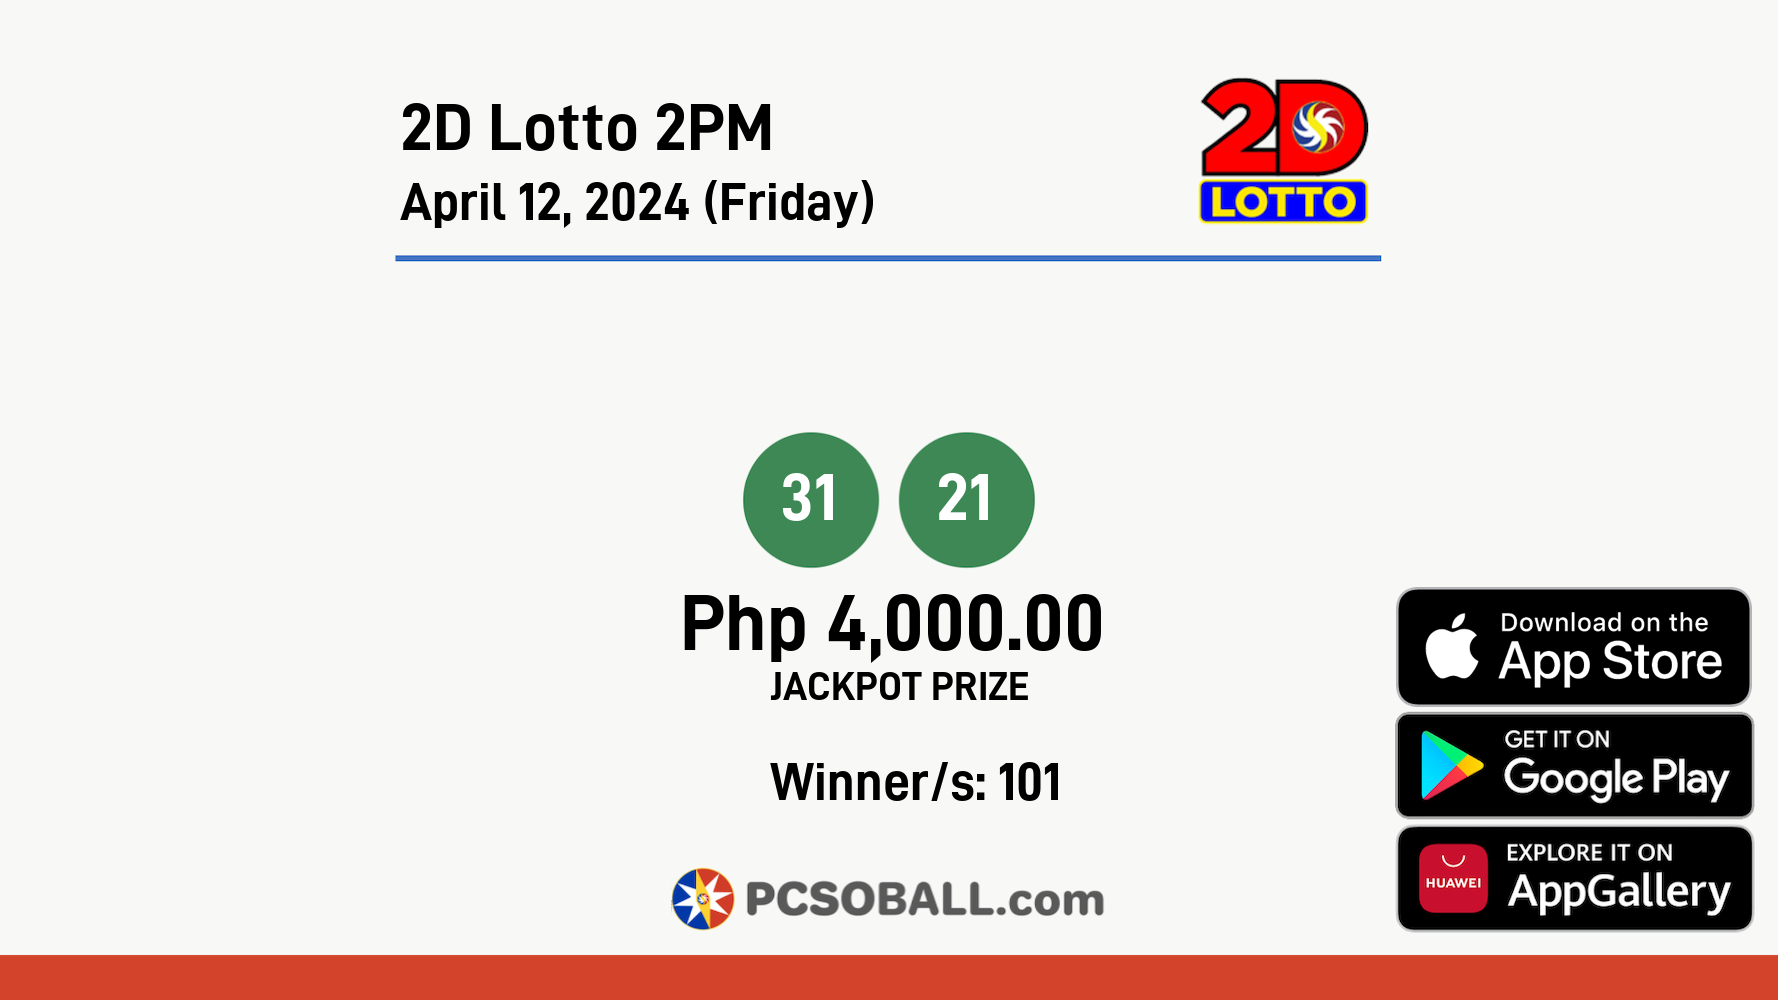 2D Lotto 2PM April 12, 2024 (Friday) Result